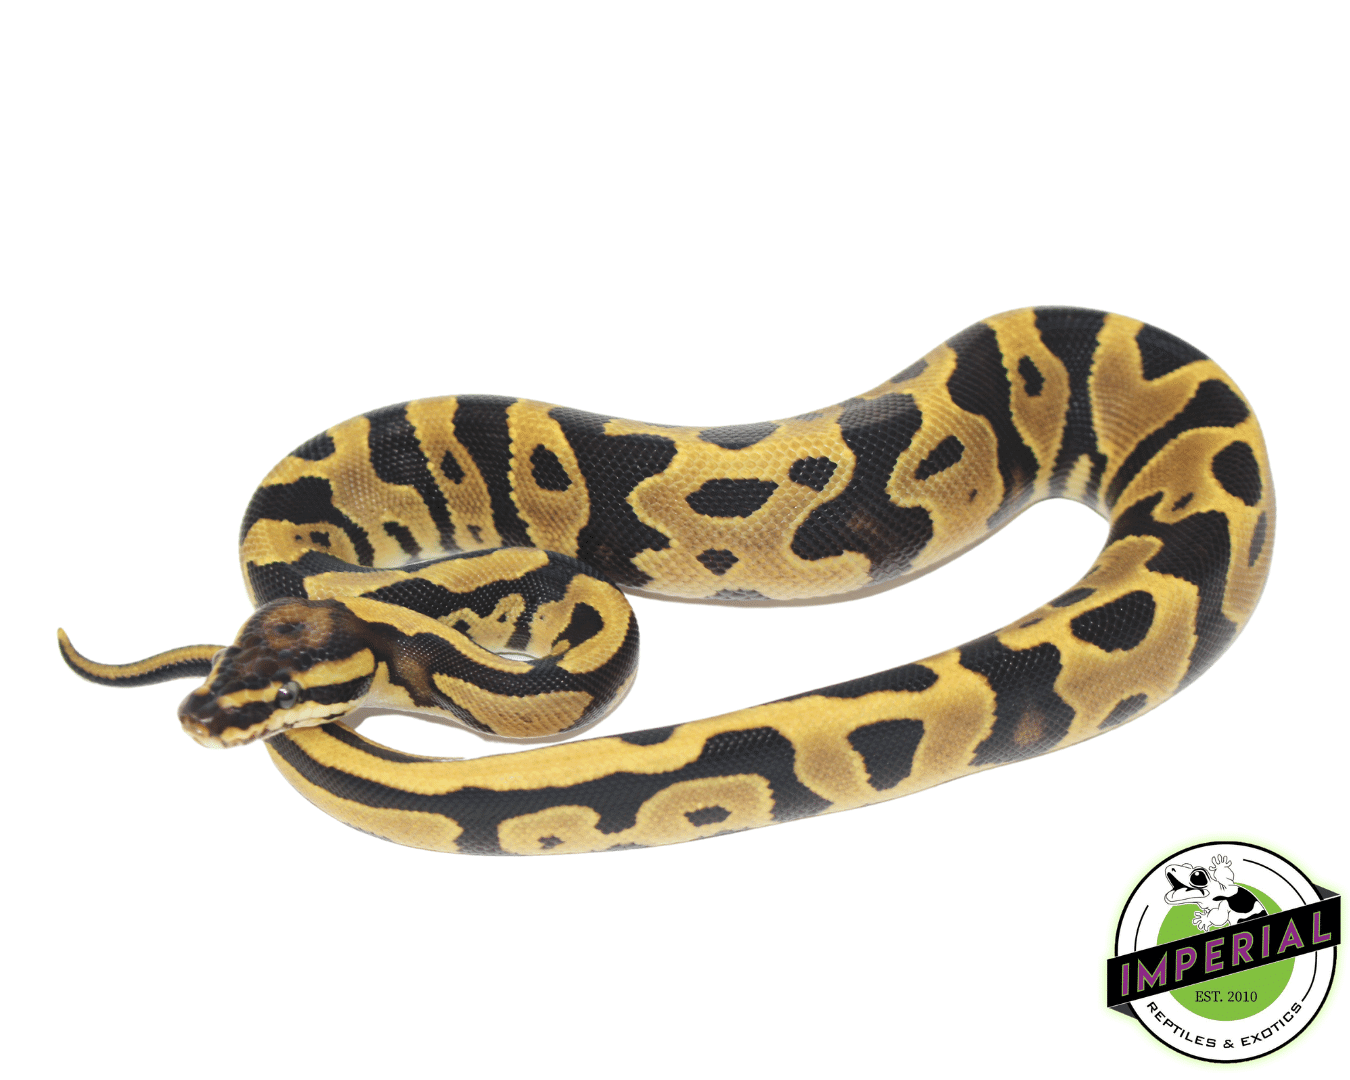 leopard fire  ball python for sale, buy reptiles online